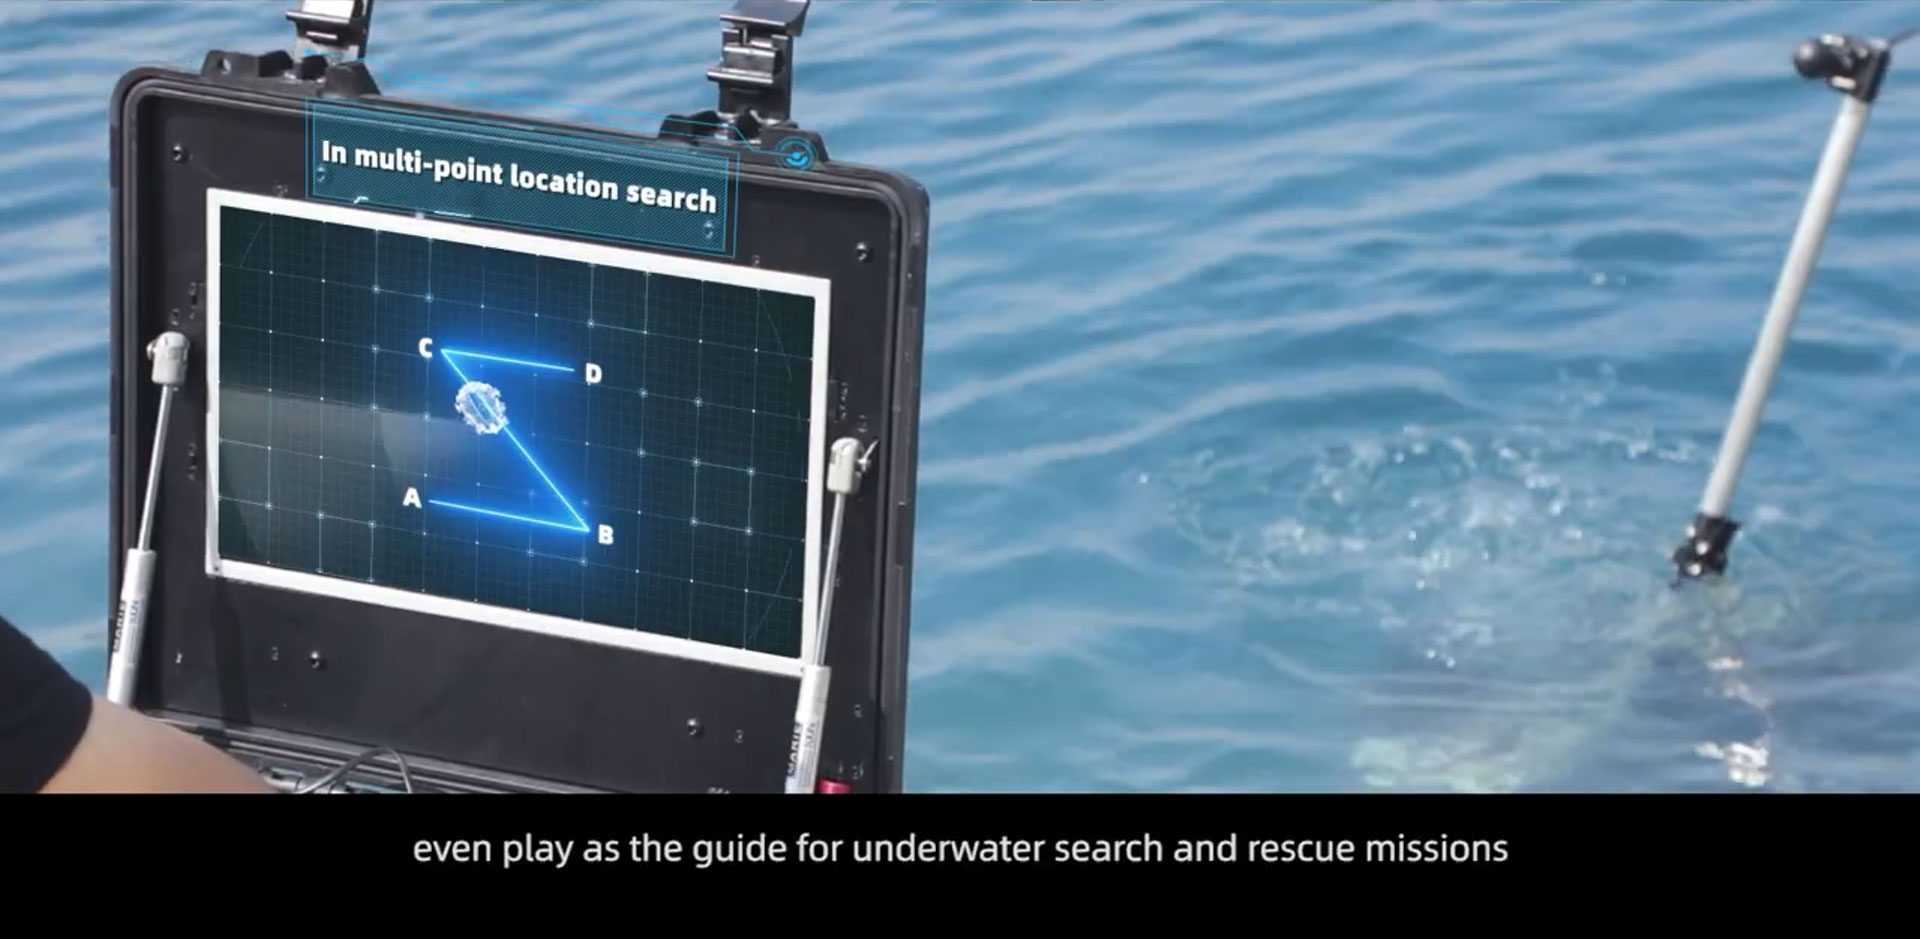 underwater-drone-multi-point-location-search-rescue-mission-fifish-v6-plus.jpg